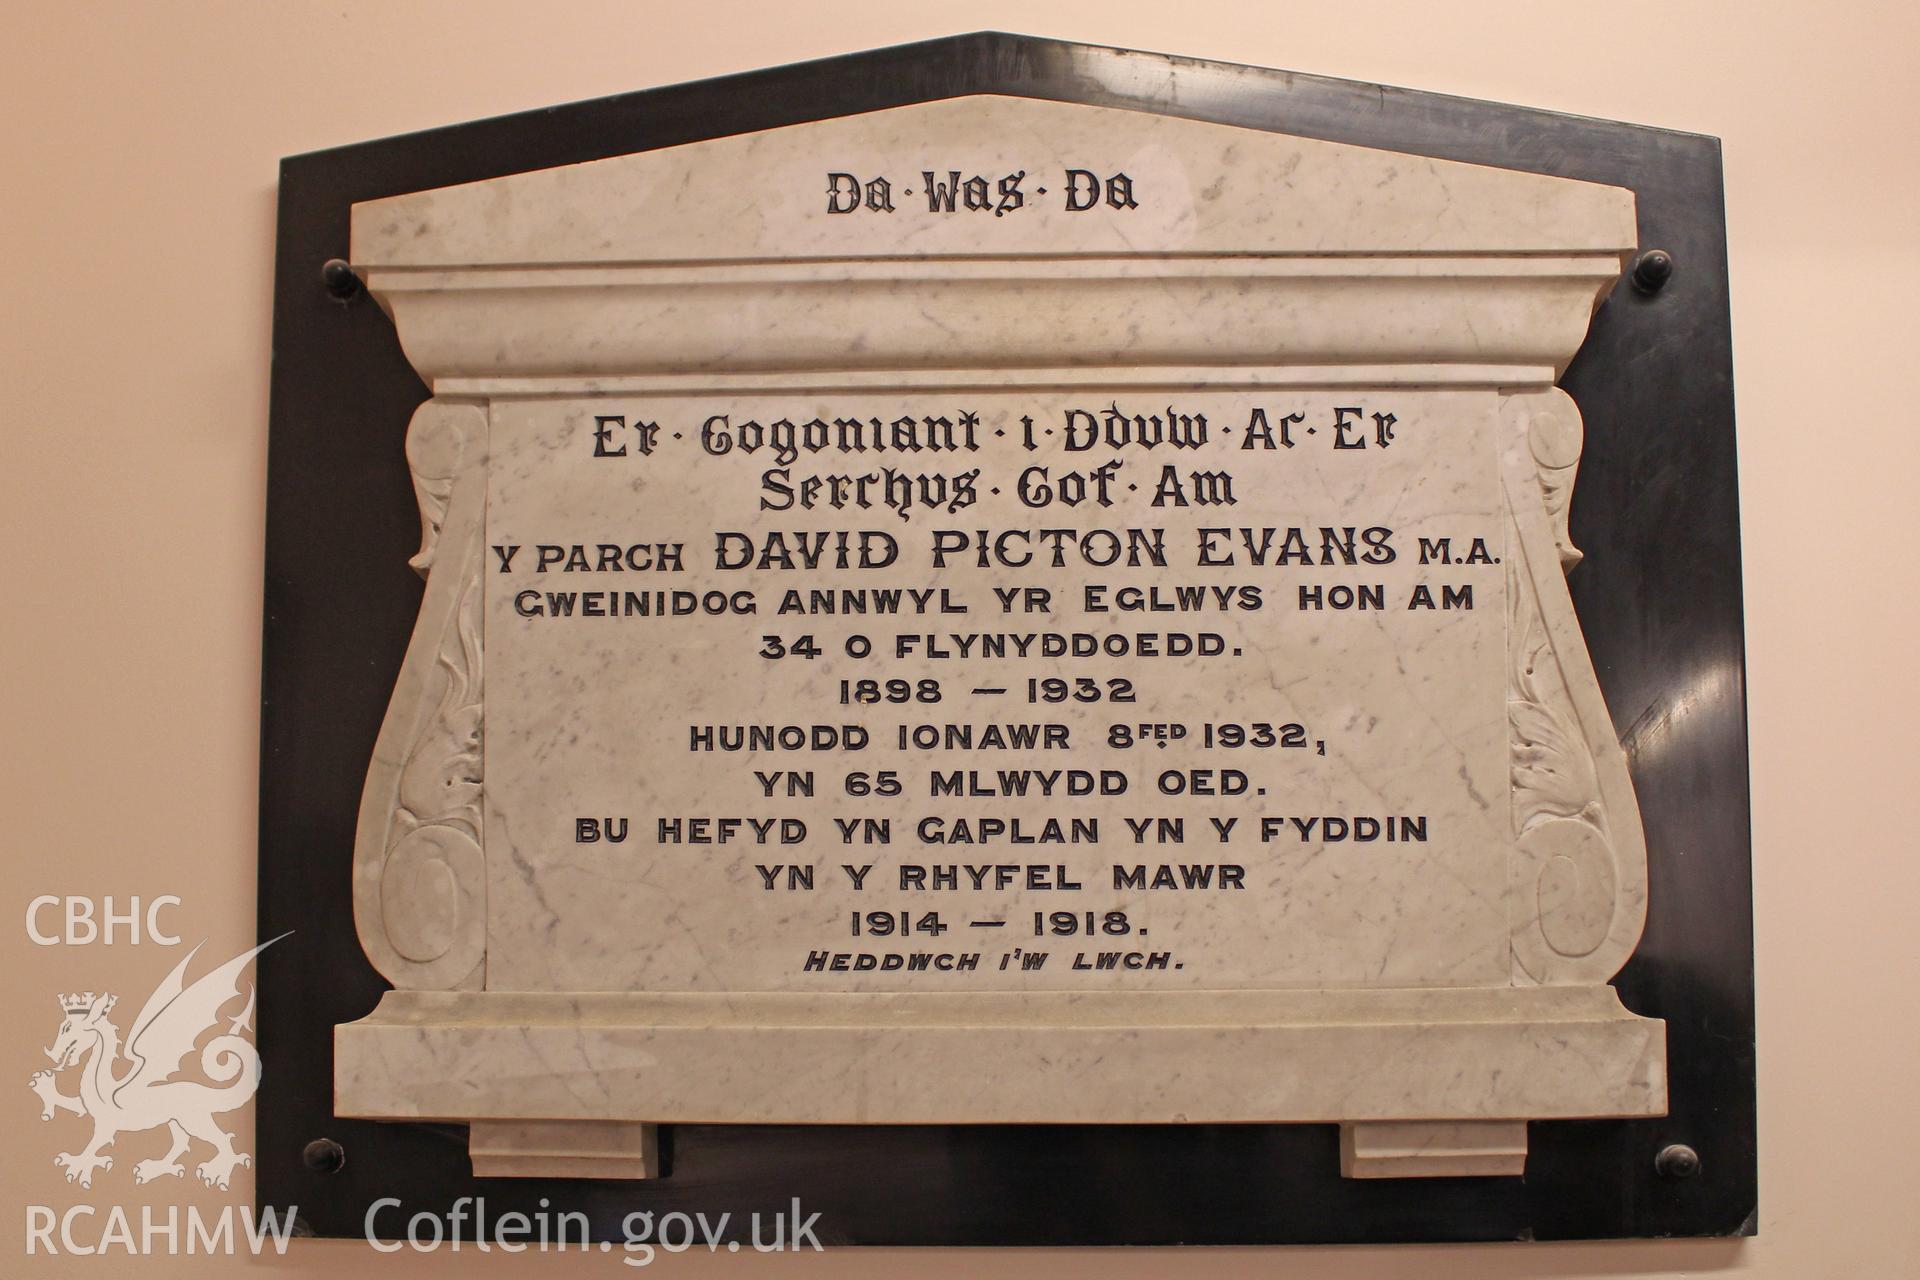 Translation:To the Glory of God & in Loving memory of Rev David Picton Evans MA. Dear minister of this church for 34 yrs 1898-1932. Died 8/1/1932 age 65. Also served as chaplain in WW1 RIP. Philadelphia Chapel, Morriston. Photograph:Sue Fielding 13/5/2017